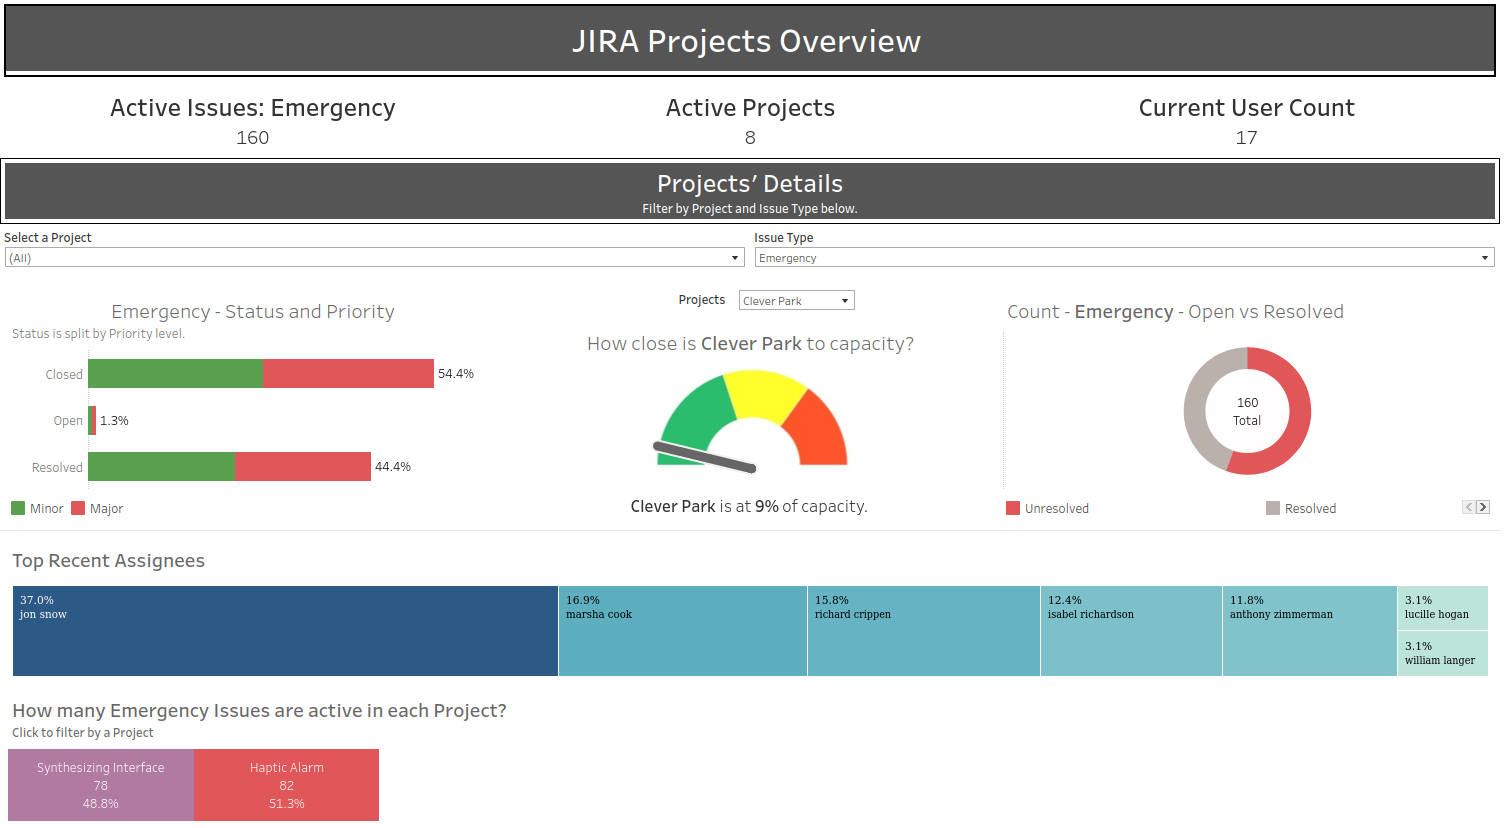 Overview of the Ongoing Projects in JIRA